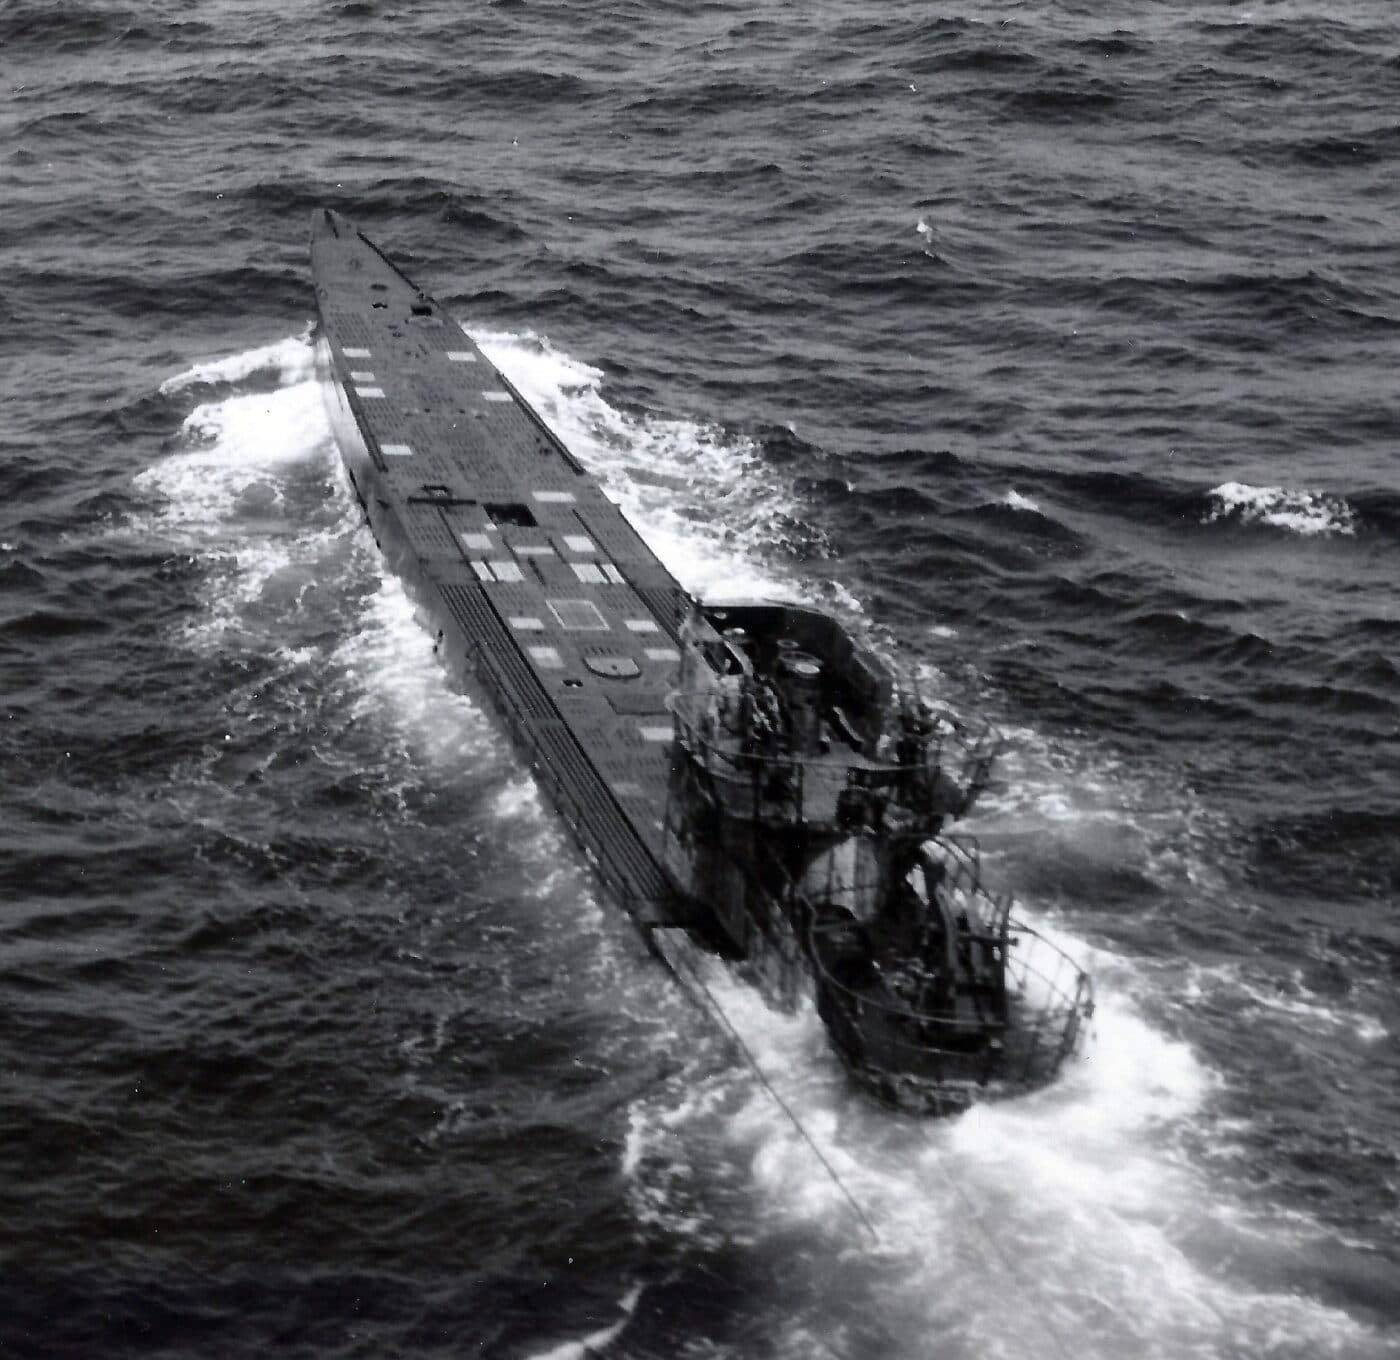 Damaged U-505 before boarding by US Navy personnel